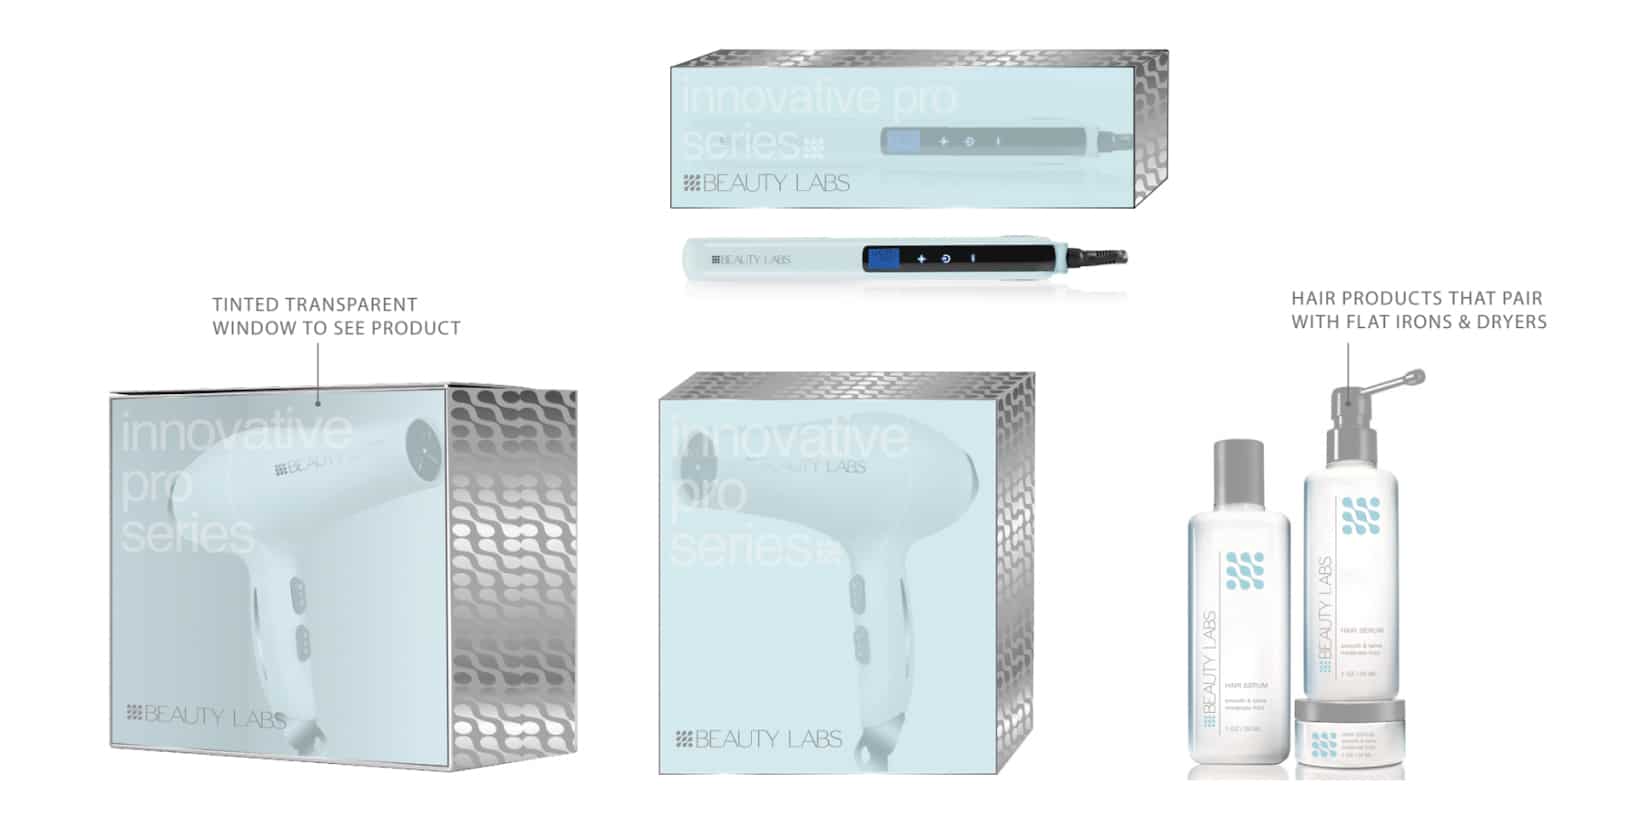 minimalist packaging design of Beauty Labs hair tools including flat iron, hair dryers, and hair products against white backdrop.